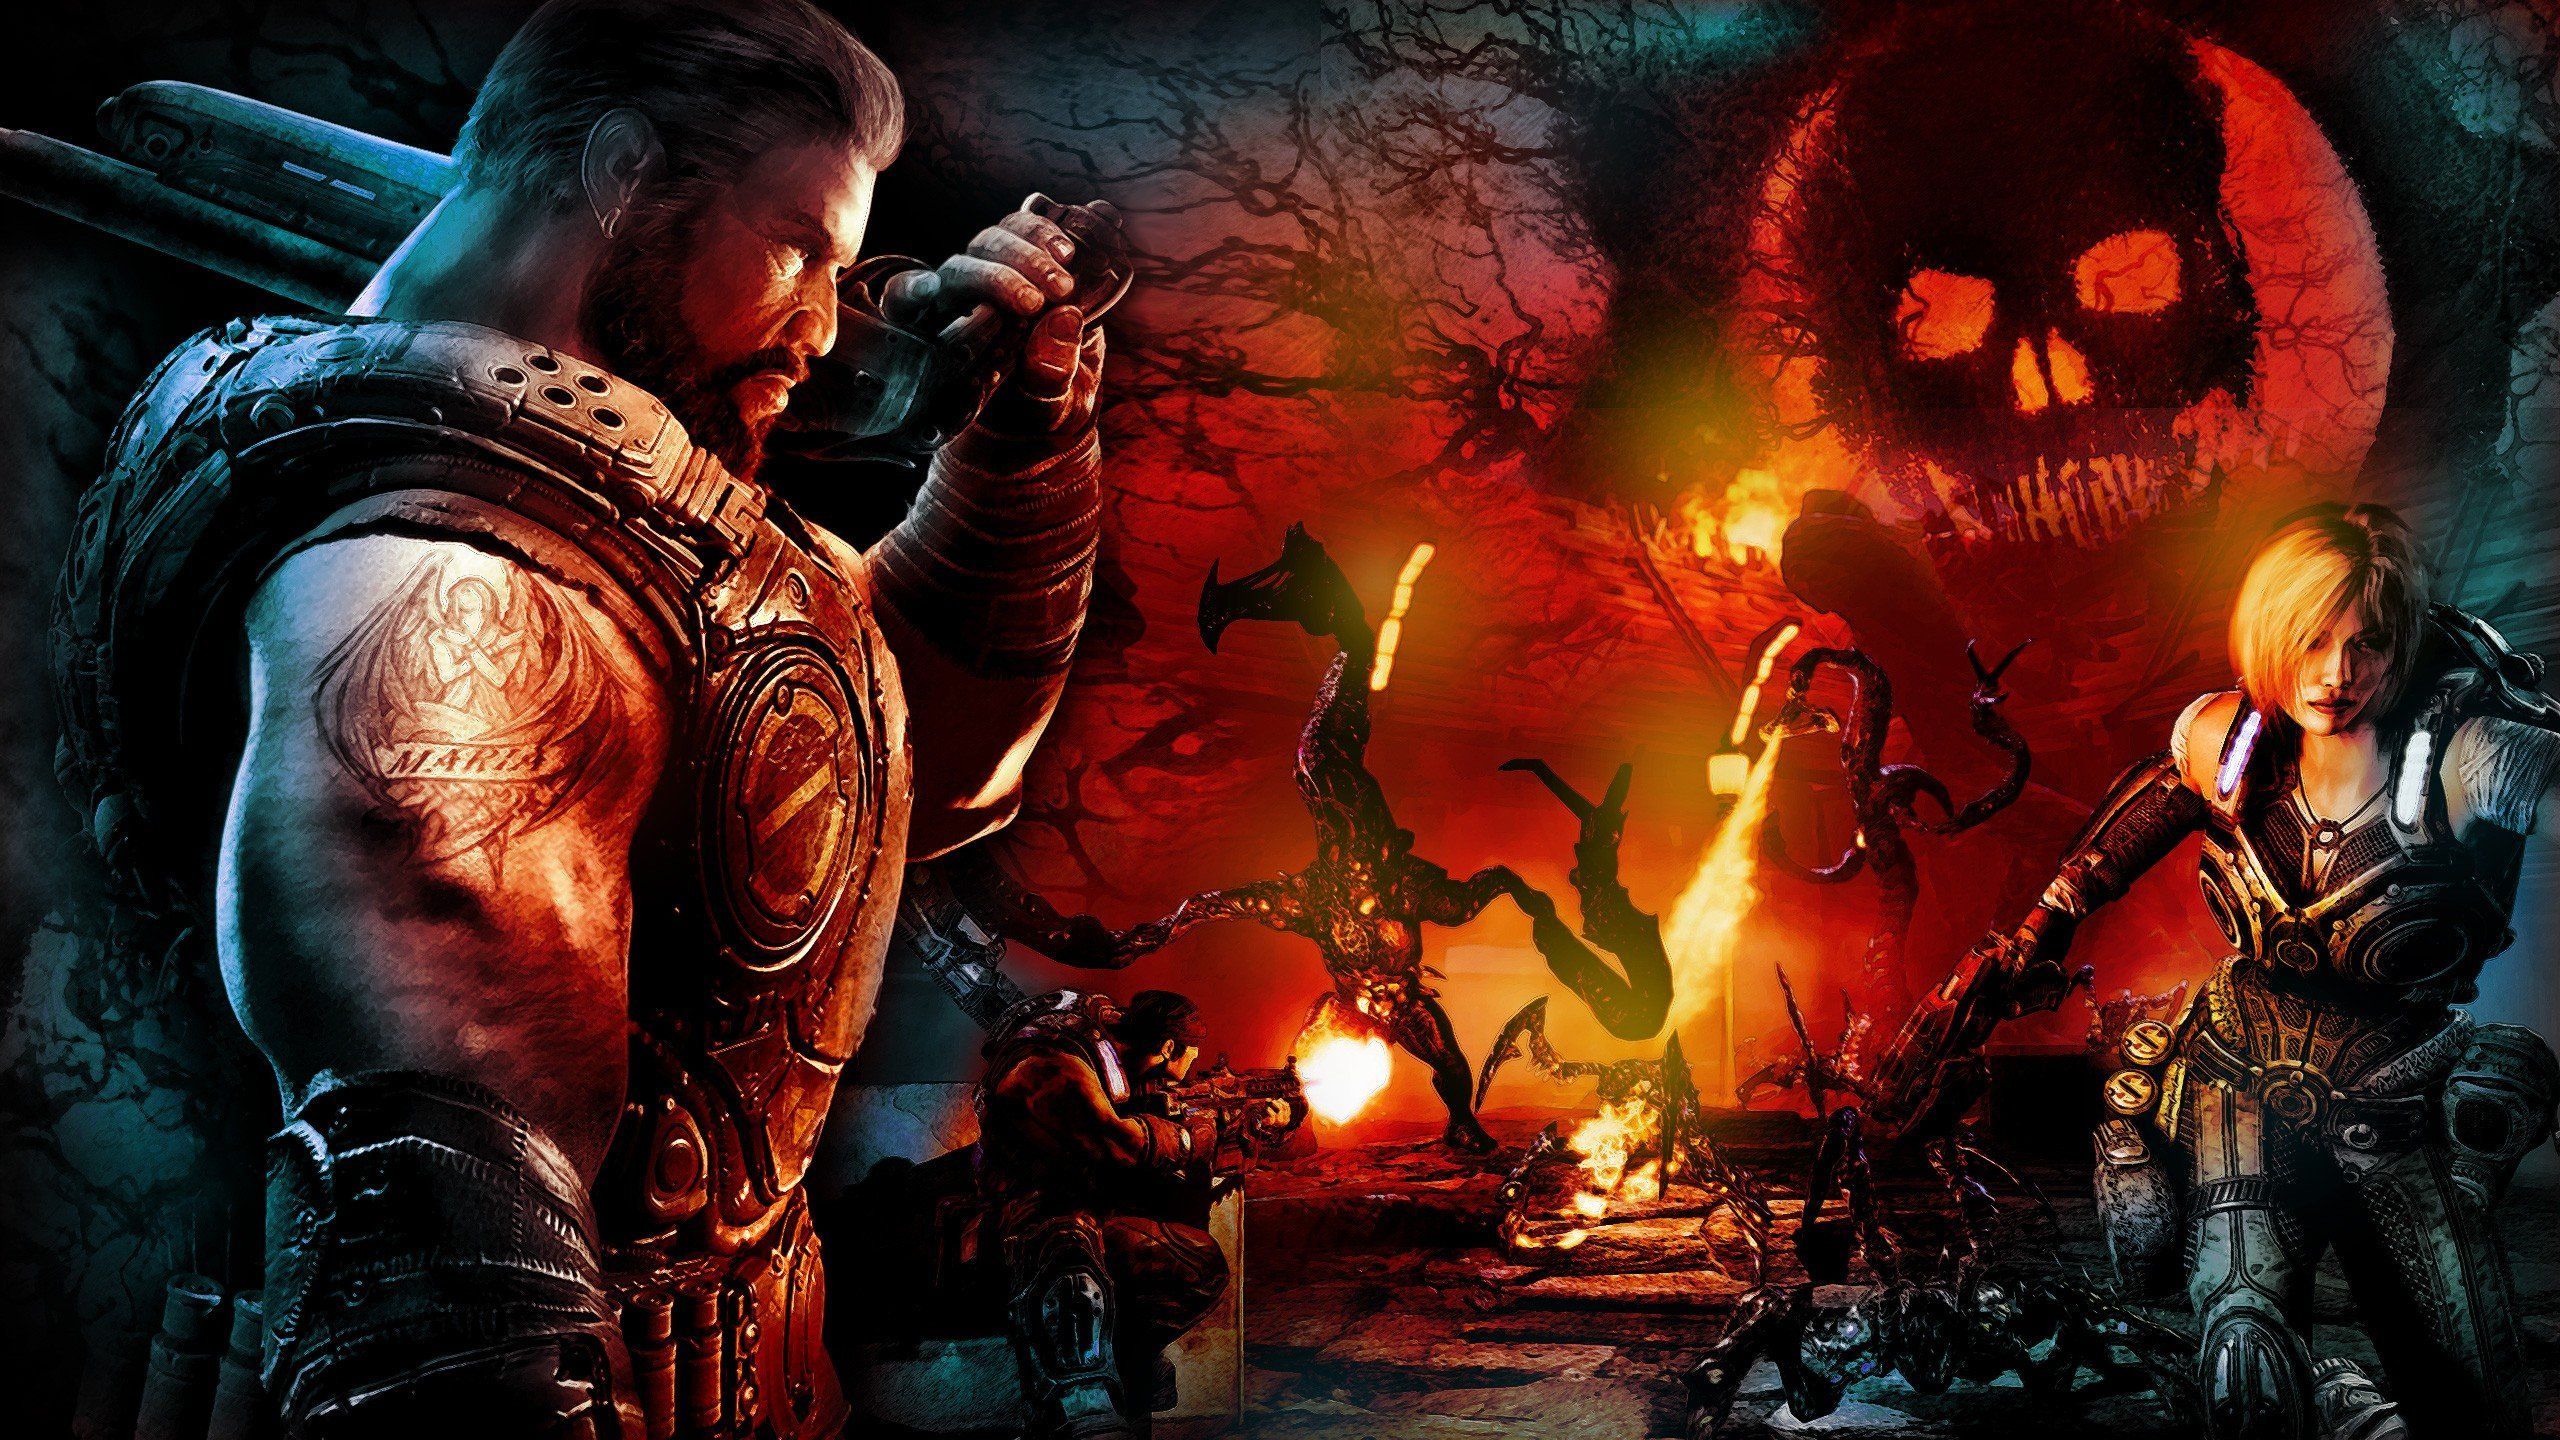 Gears Of War 3 Brothers To The End Background in 2020